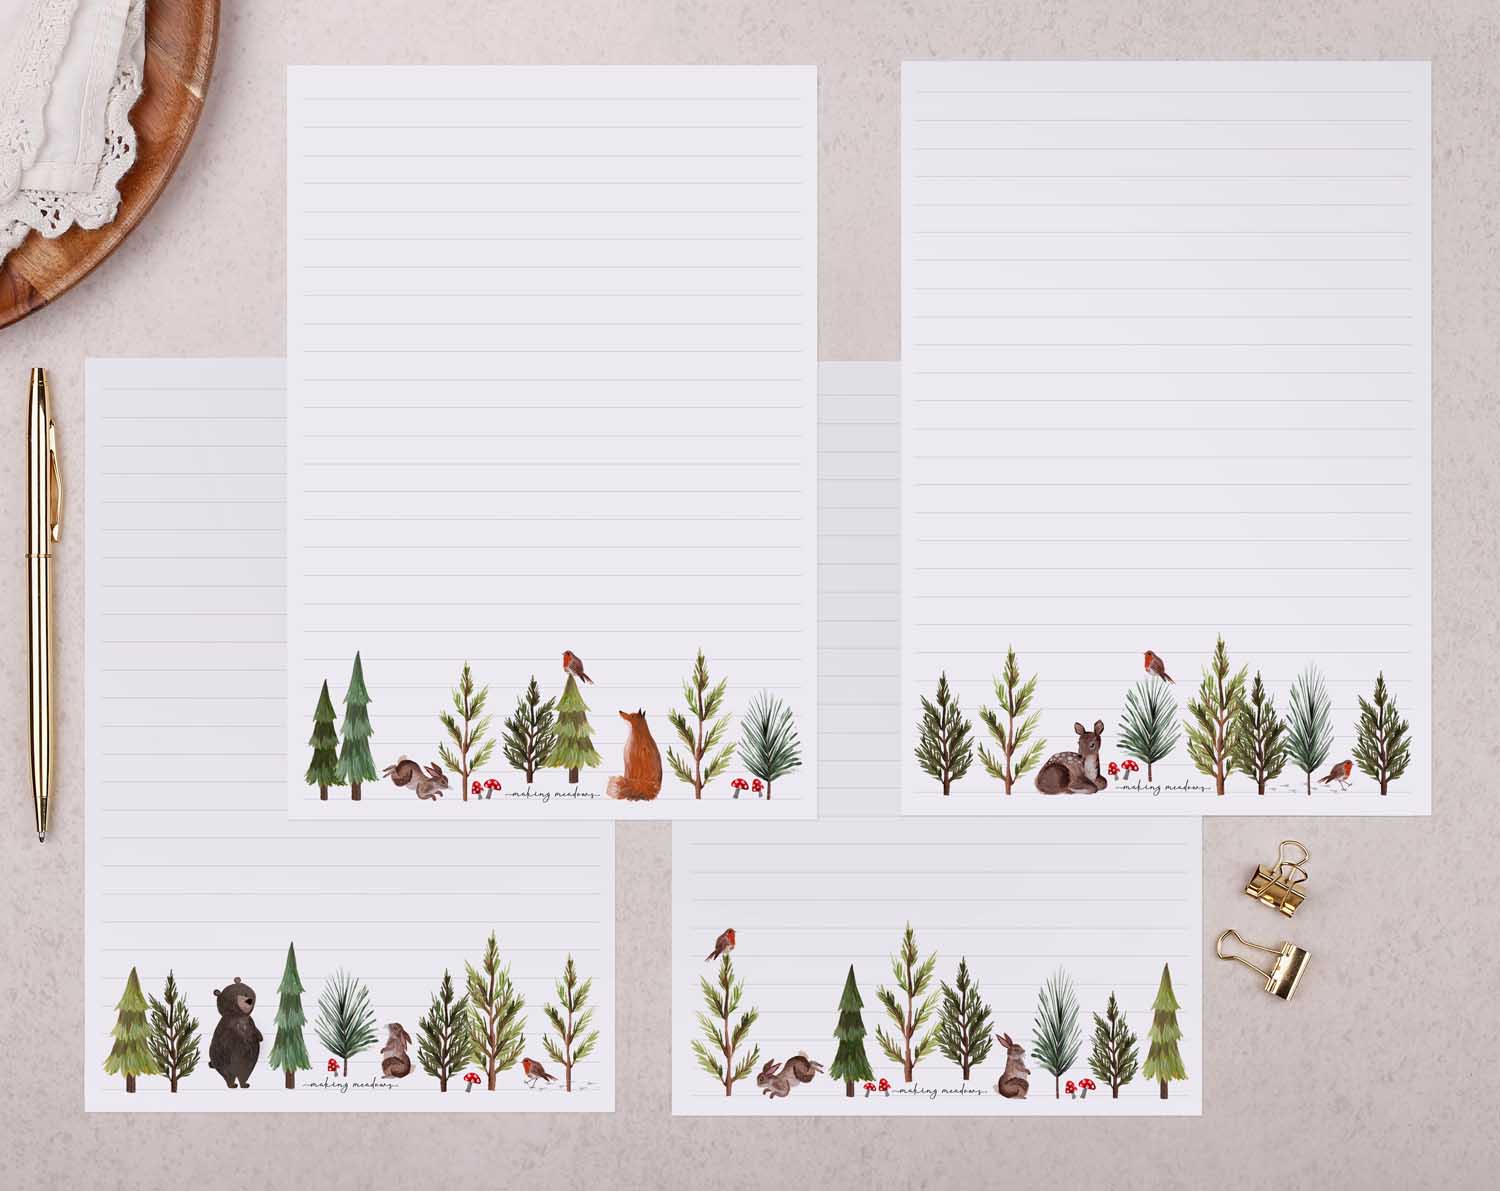 32 sheets of woodland forest animals design writing paper in a gift box set